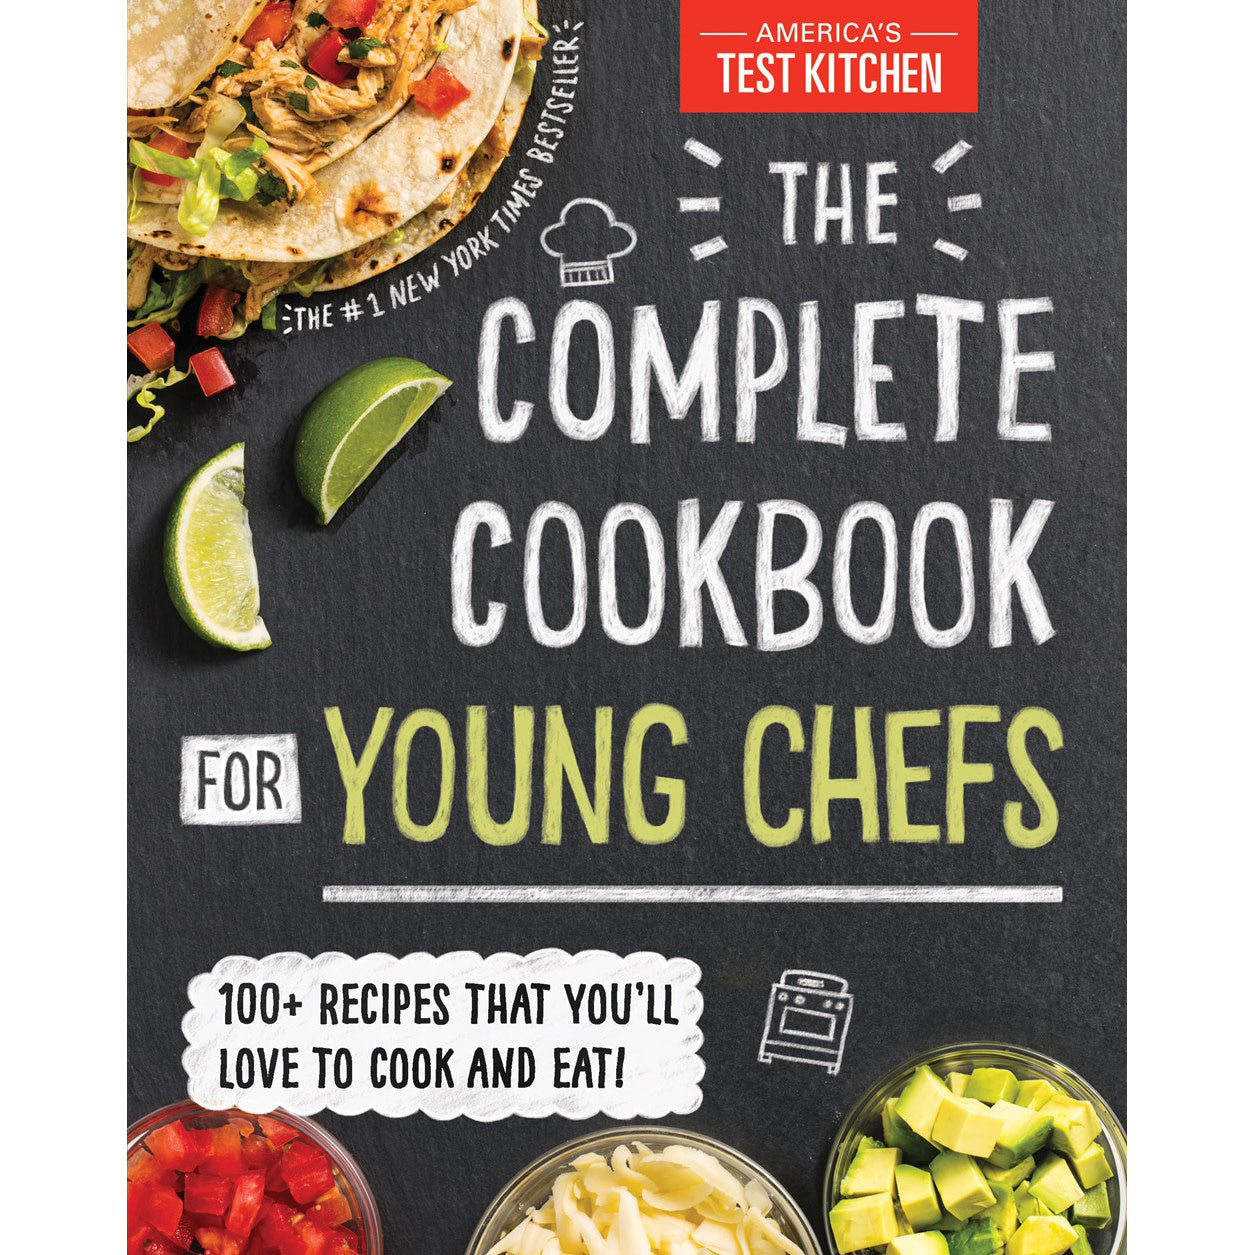 Complete Cookbook for Young Chefs - ATK